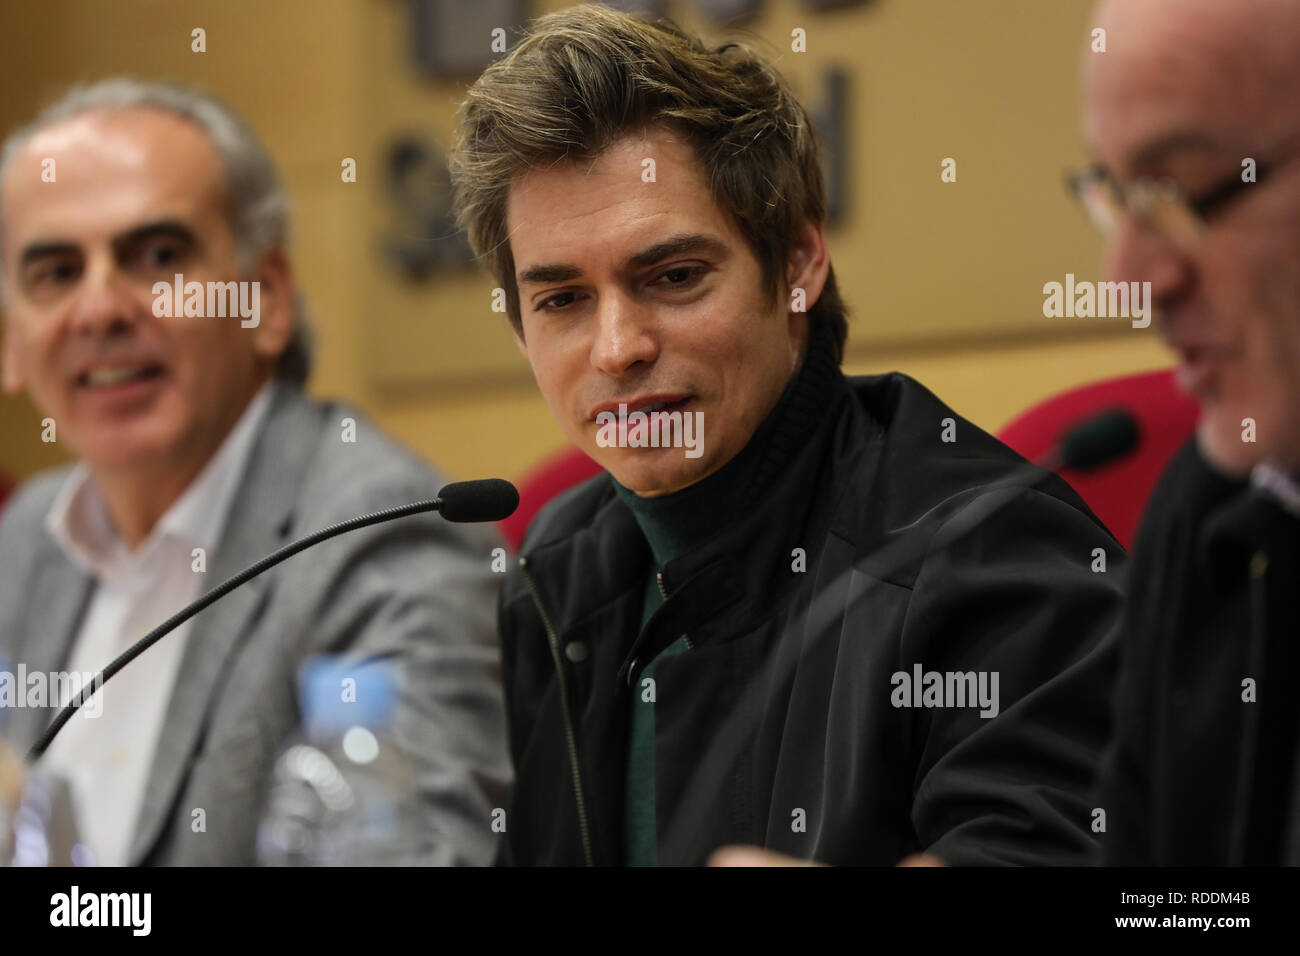 Madrid, Spain. 18th Jan, 2019. Carlos Baute, Venezuelan singer and president of the NGO ''A medicine for Venezuela'' speaking about the situation in Venezuela. The Councilor for Health of the Community of Madrid, Enrique Ruiz Escudero, accompanied by the ambassador of the NGO 'A medicine for Venezuela', the Venezuelan singer Carlos Baute, and the director of the Association, Vanessa Pineda, assist in the donation of sanitary material performed by the University Hospital of the Sureste to the aforementioned organization. Credit: Jesus Hellin/ZUMA Wire/Alamy Live News Stock Photo